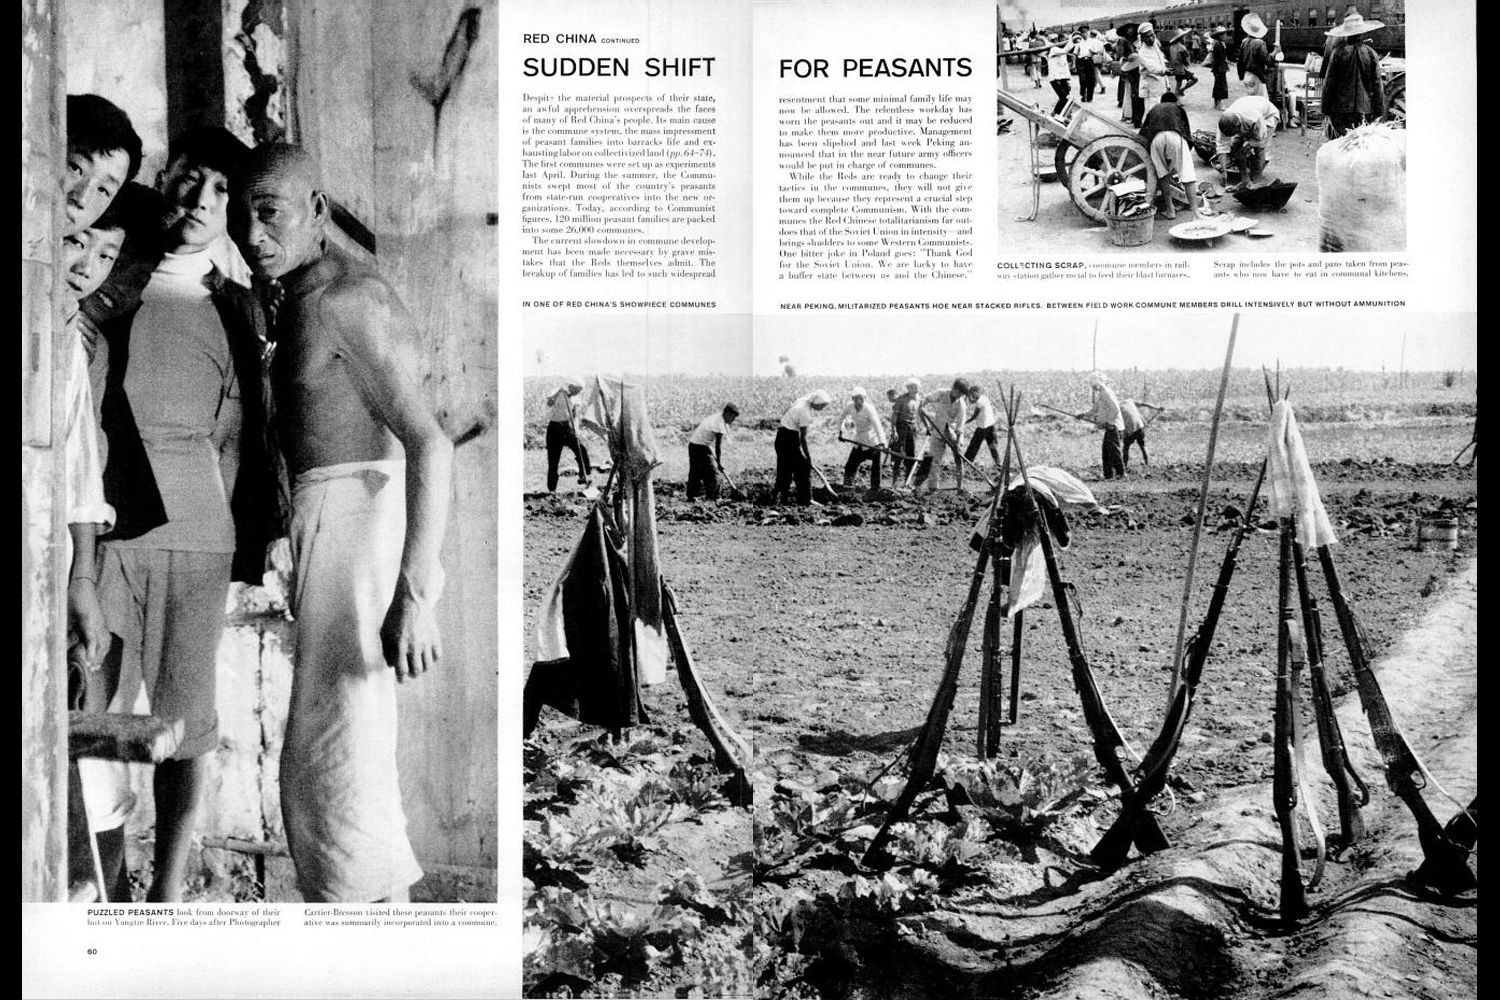 Pages from "Red China Bid for a Future," featuring photographs by Henri Cartier-Bresson, as the article appeared in the January 5, 1959, issue of LIFE.